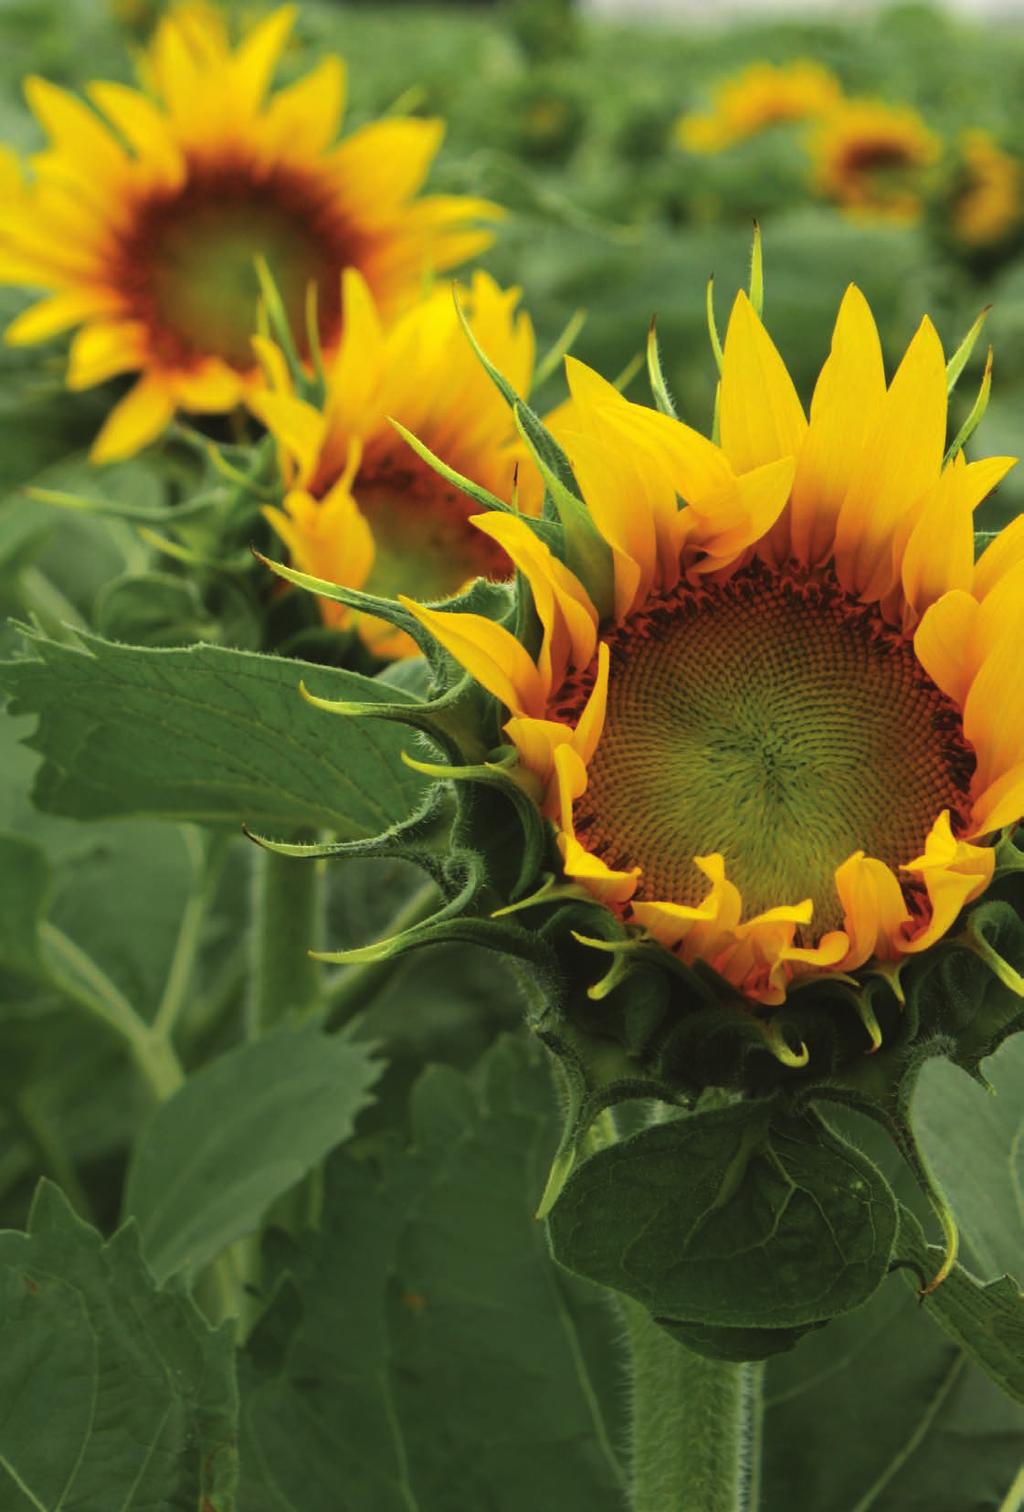 Syngenta delivers grower value in sunflowers At Syngenta, we are proud to support the sunflower industry.